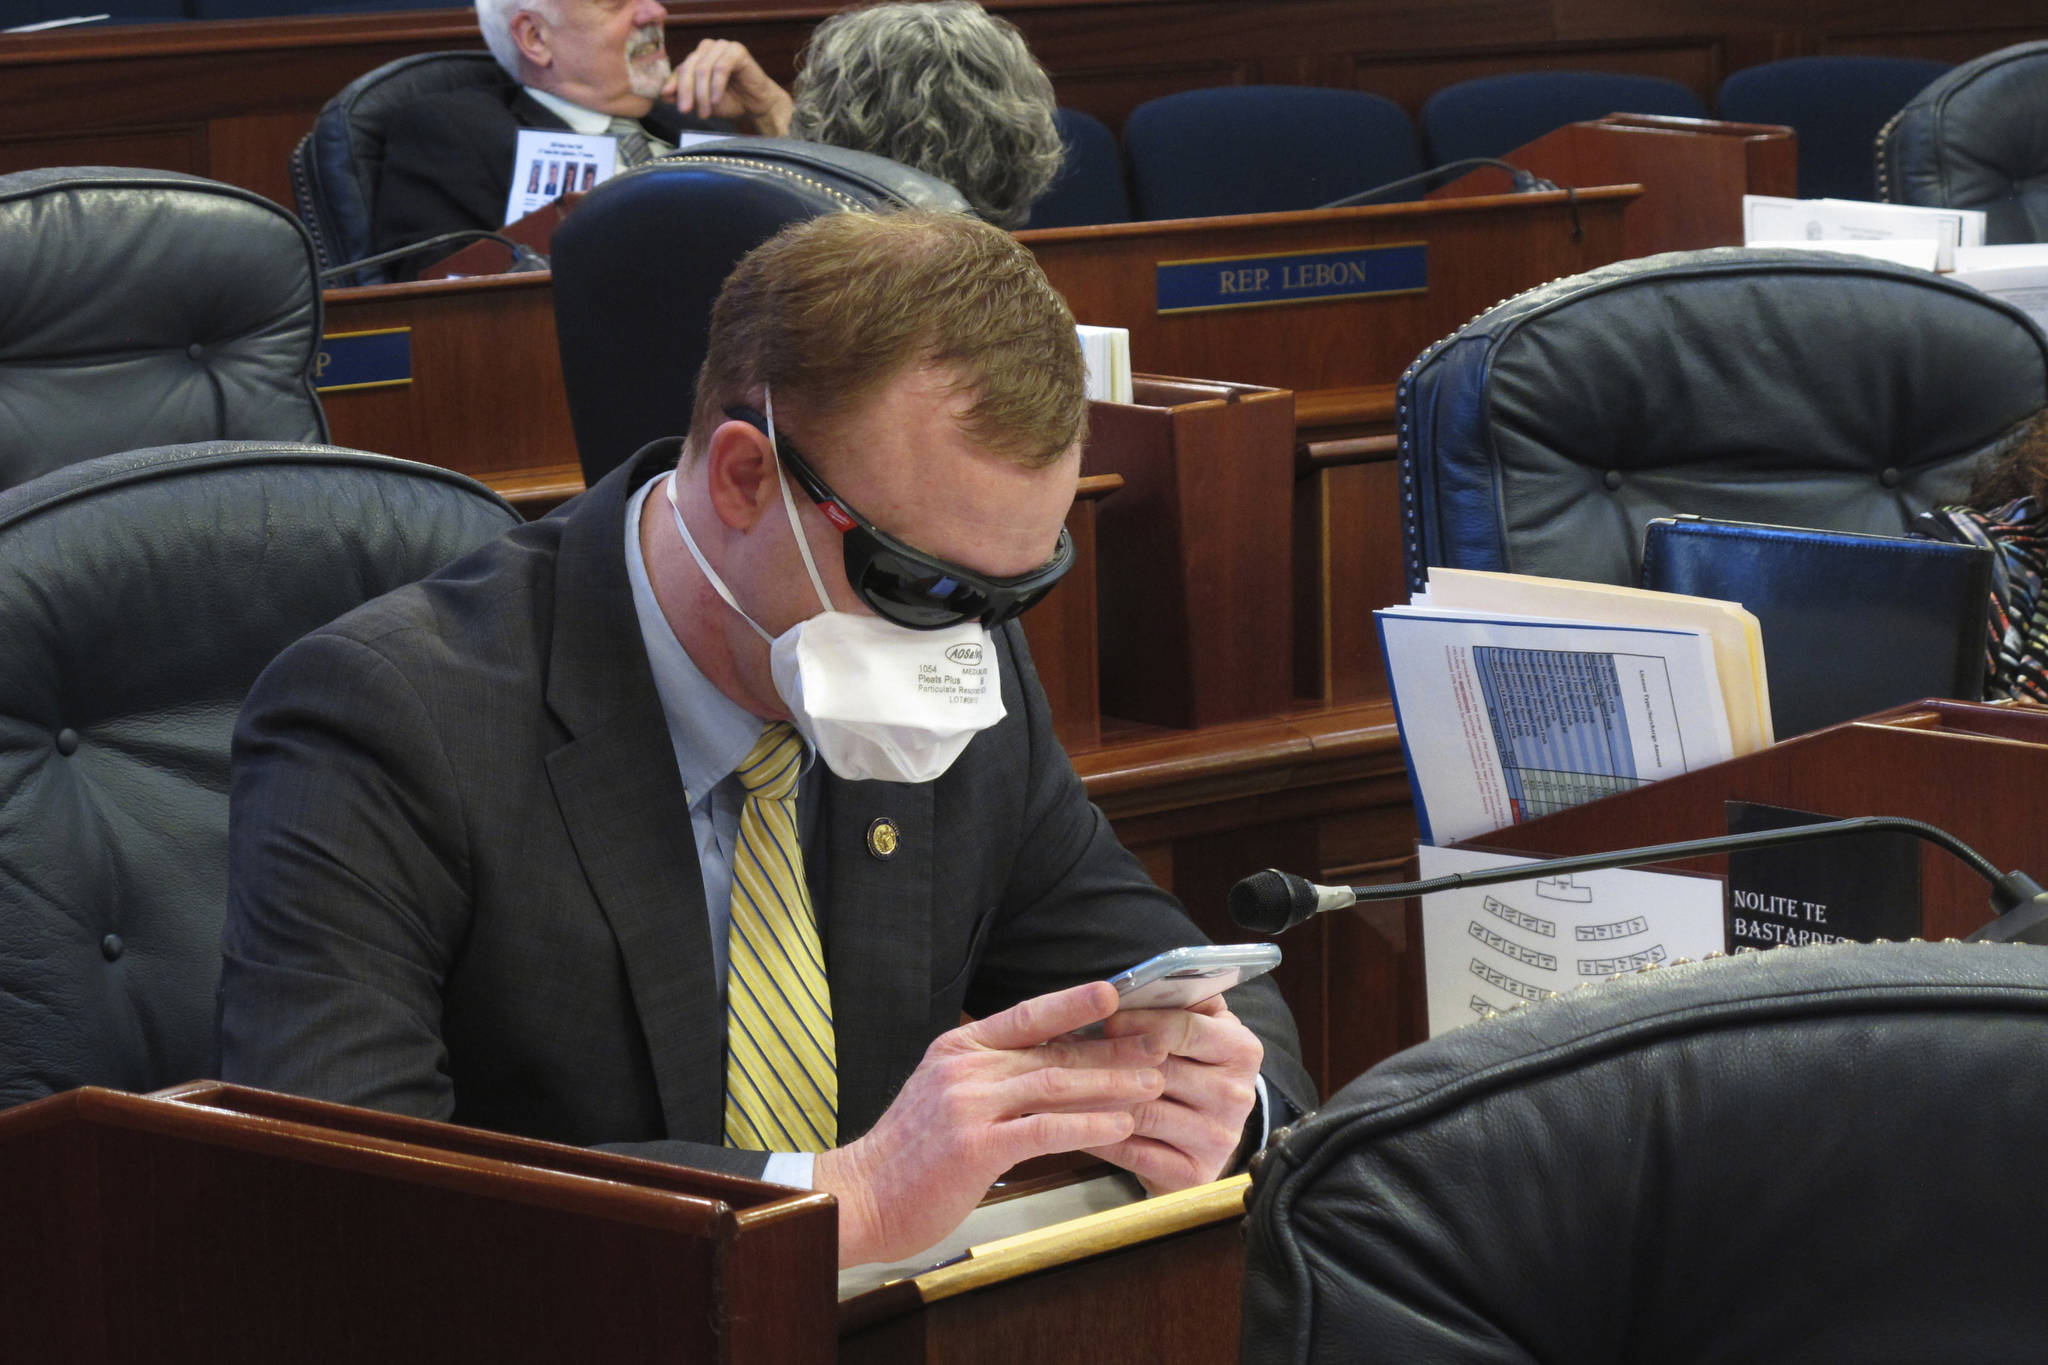 Alaska state Rep. David Eastman sits at his desk on the House floor in Juneau, Alaska, Monday, March 23, 2020. Eastman, a Wasilla Republican, has been critical of the Legislature’s planning around the coronavirus. Rep. Sharon Jackson also wore a mask on the House floor Monday. (AP Photo/Becky Bohrer)